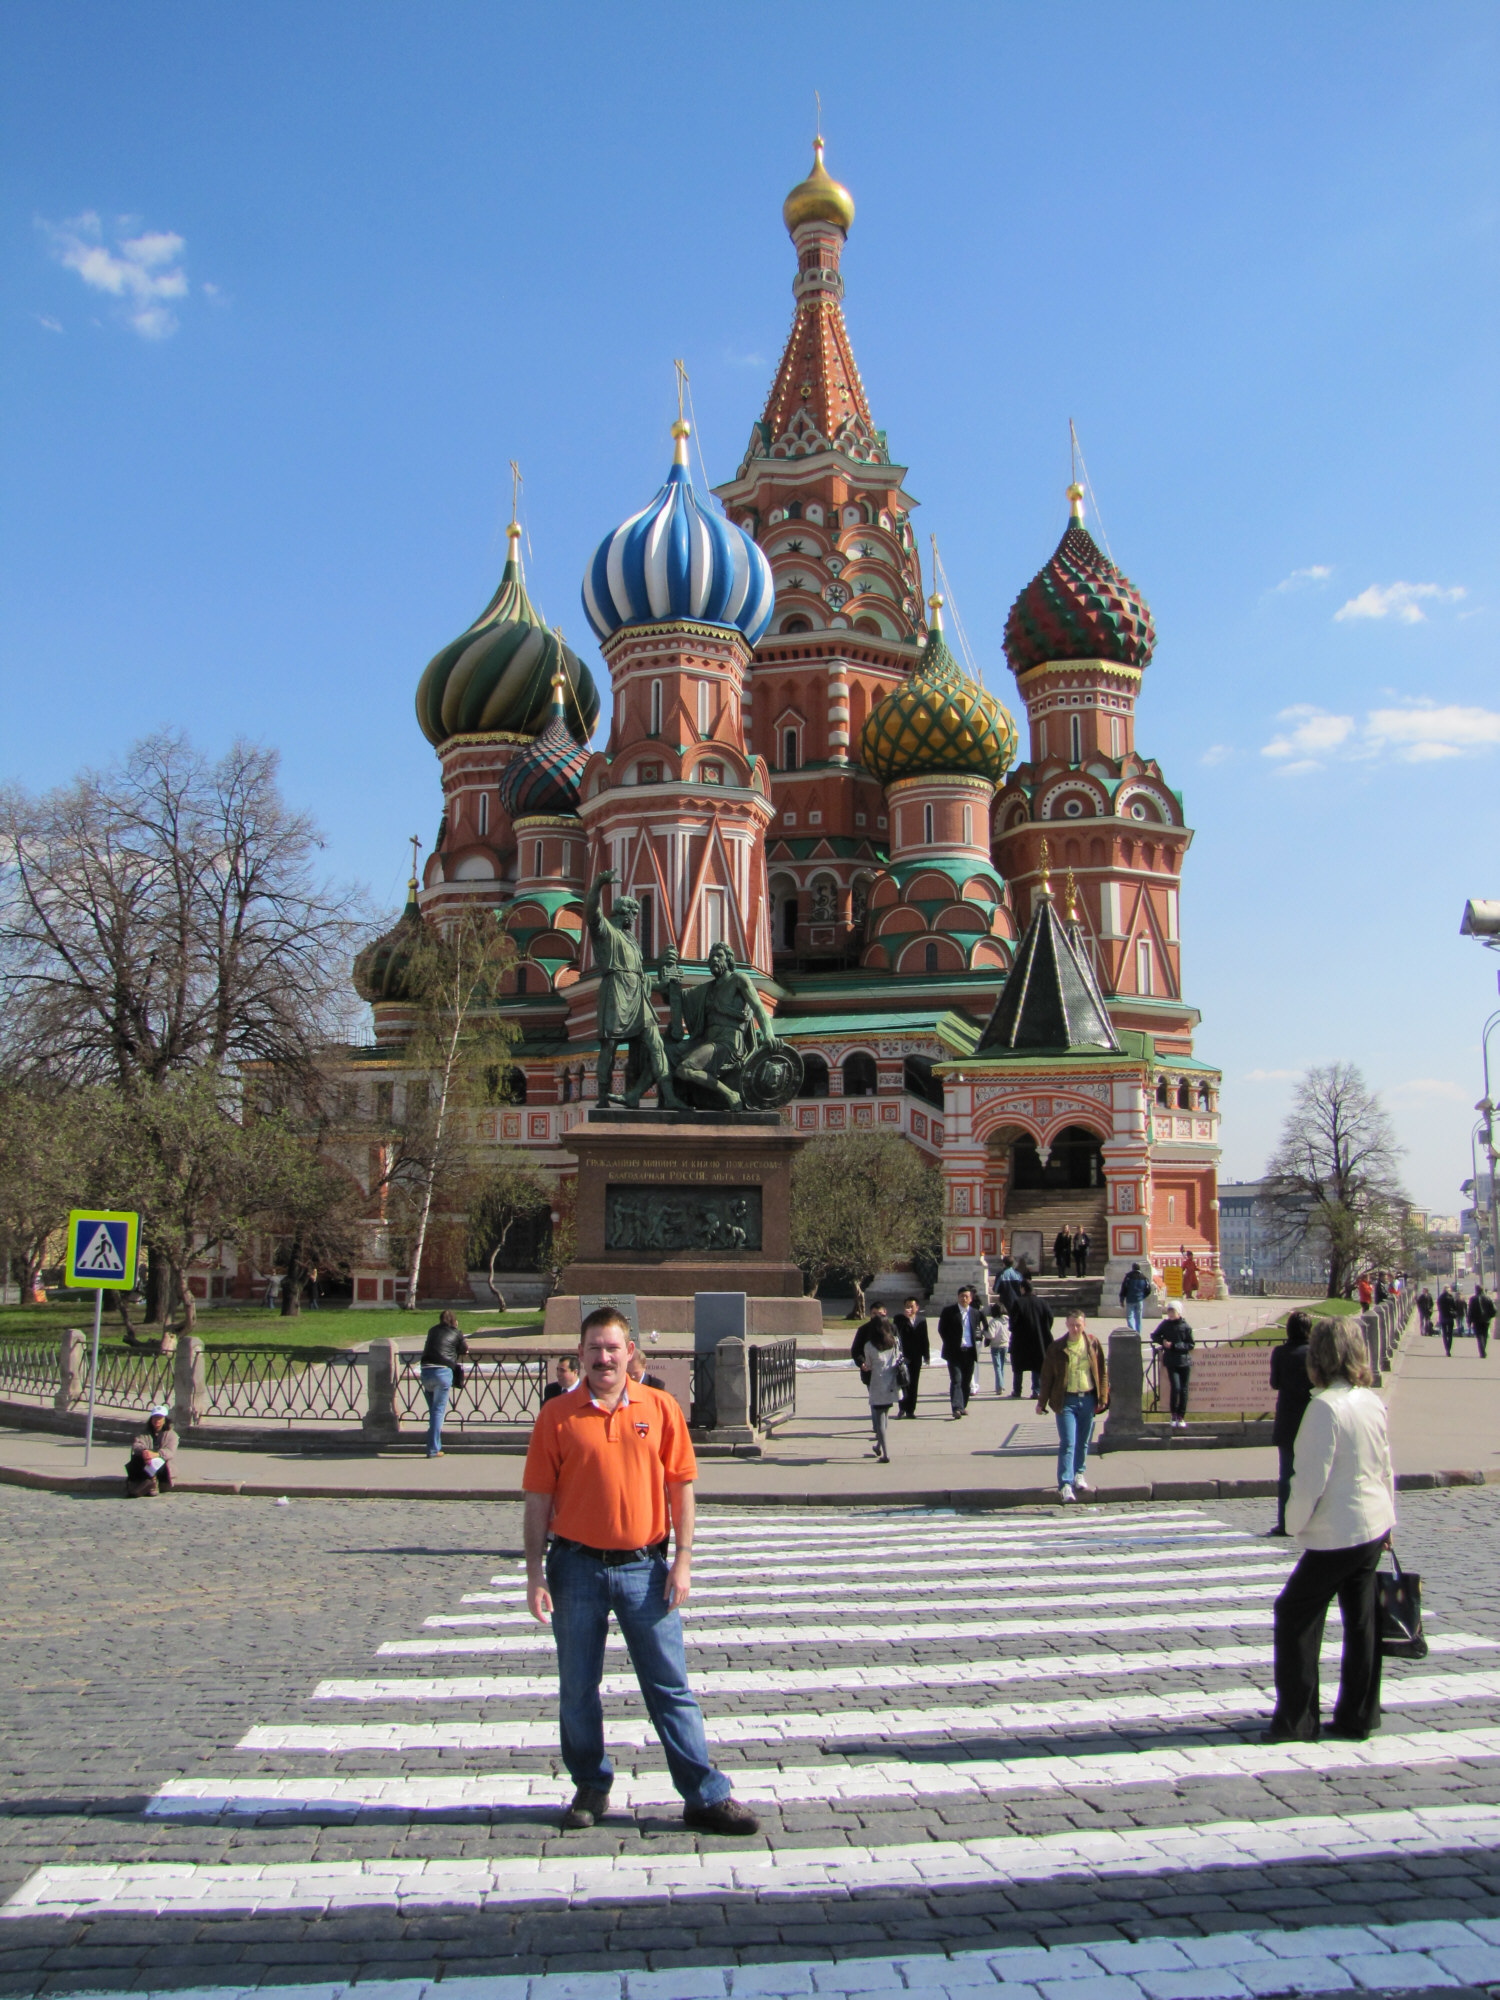 St. Basil's Cathedral on Red Square, Moscow Apr 2010